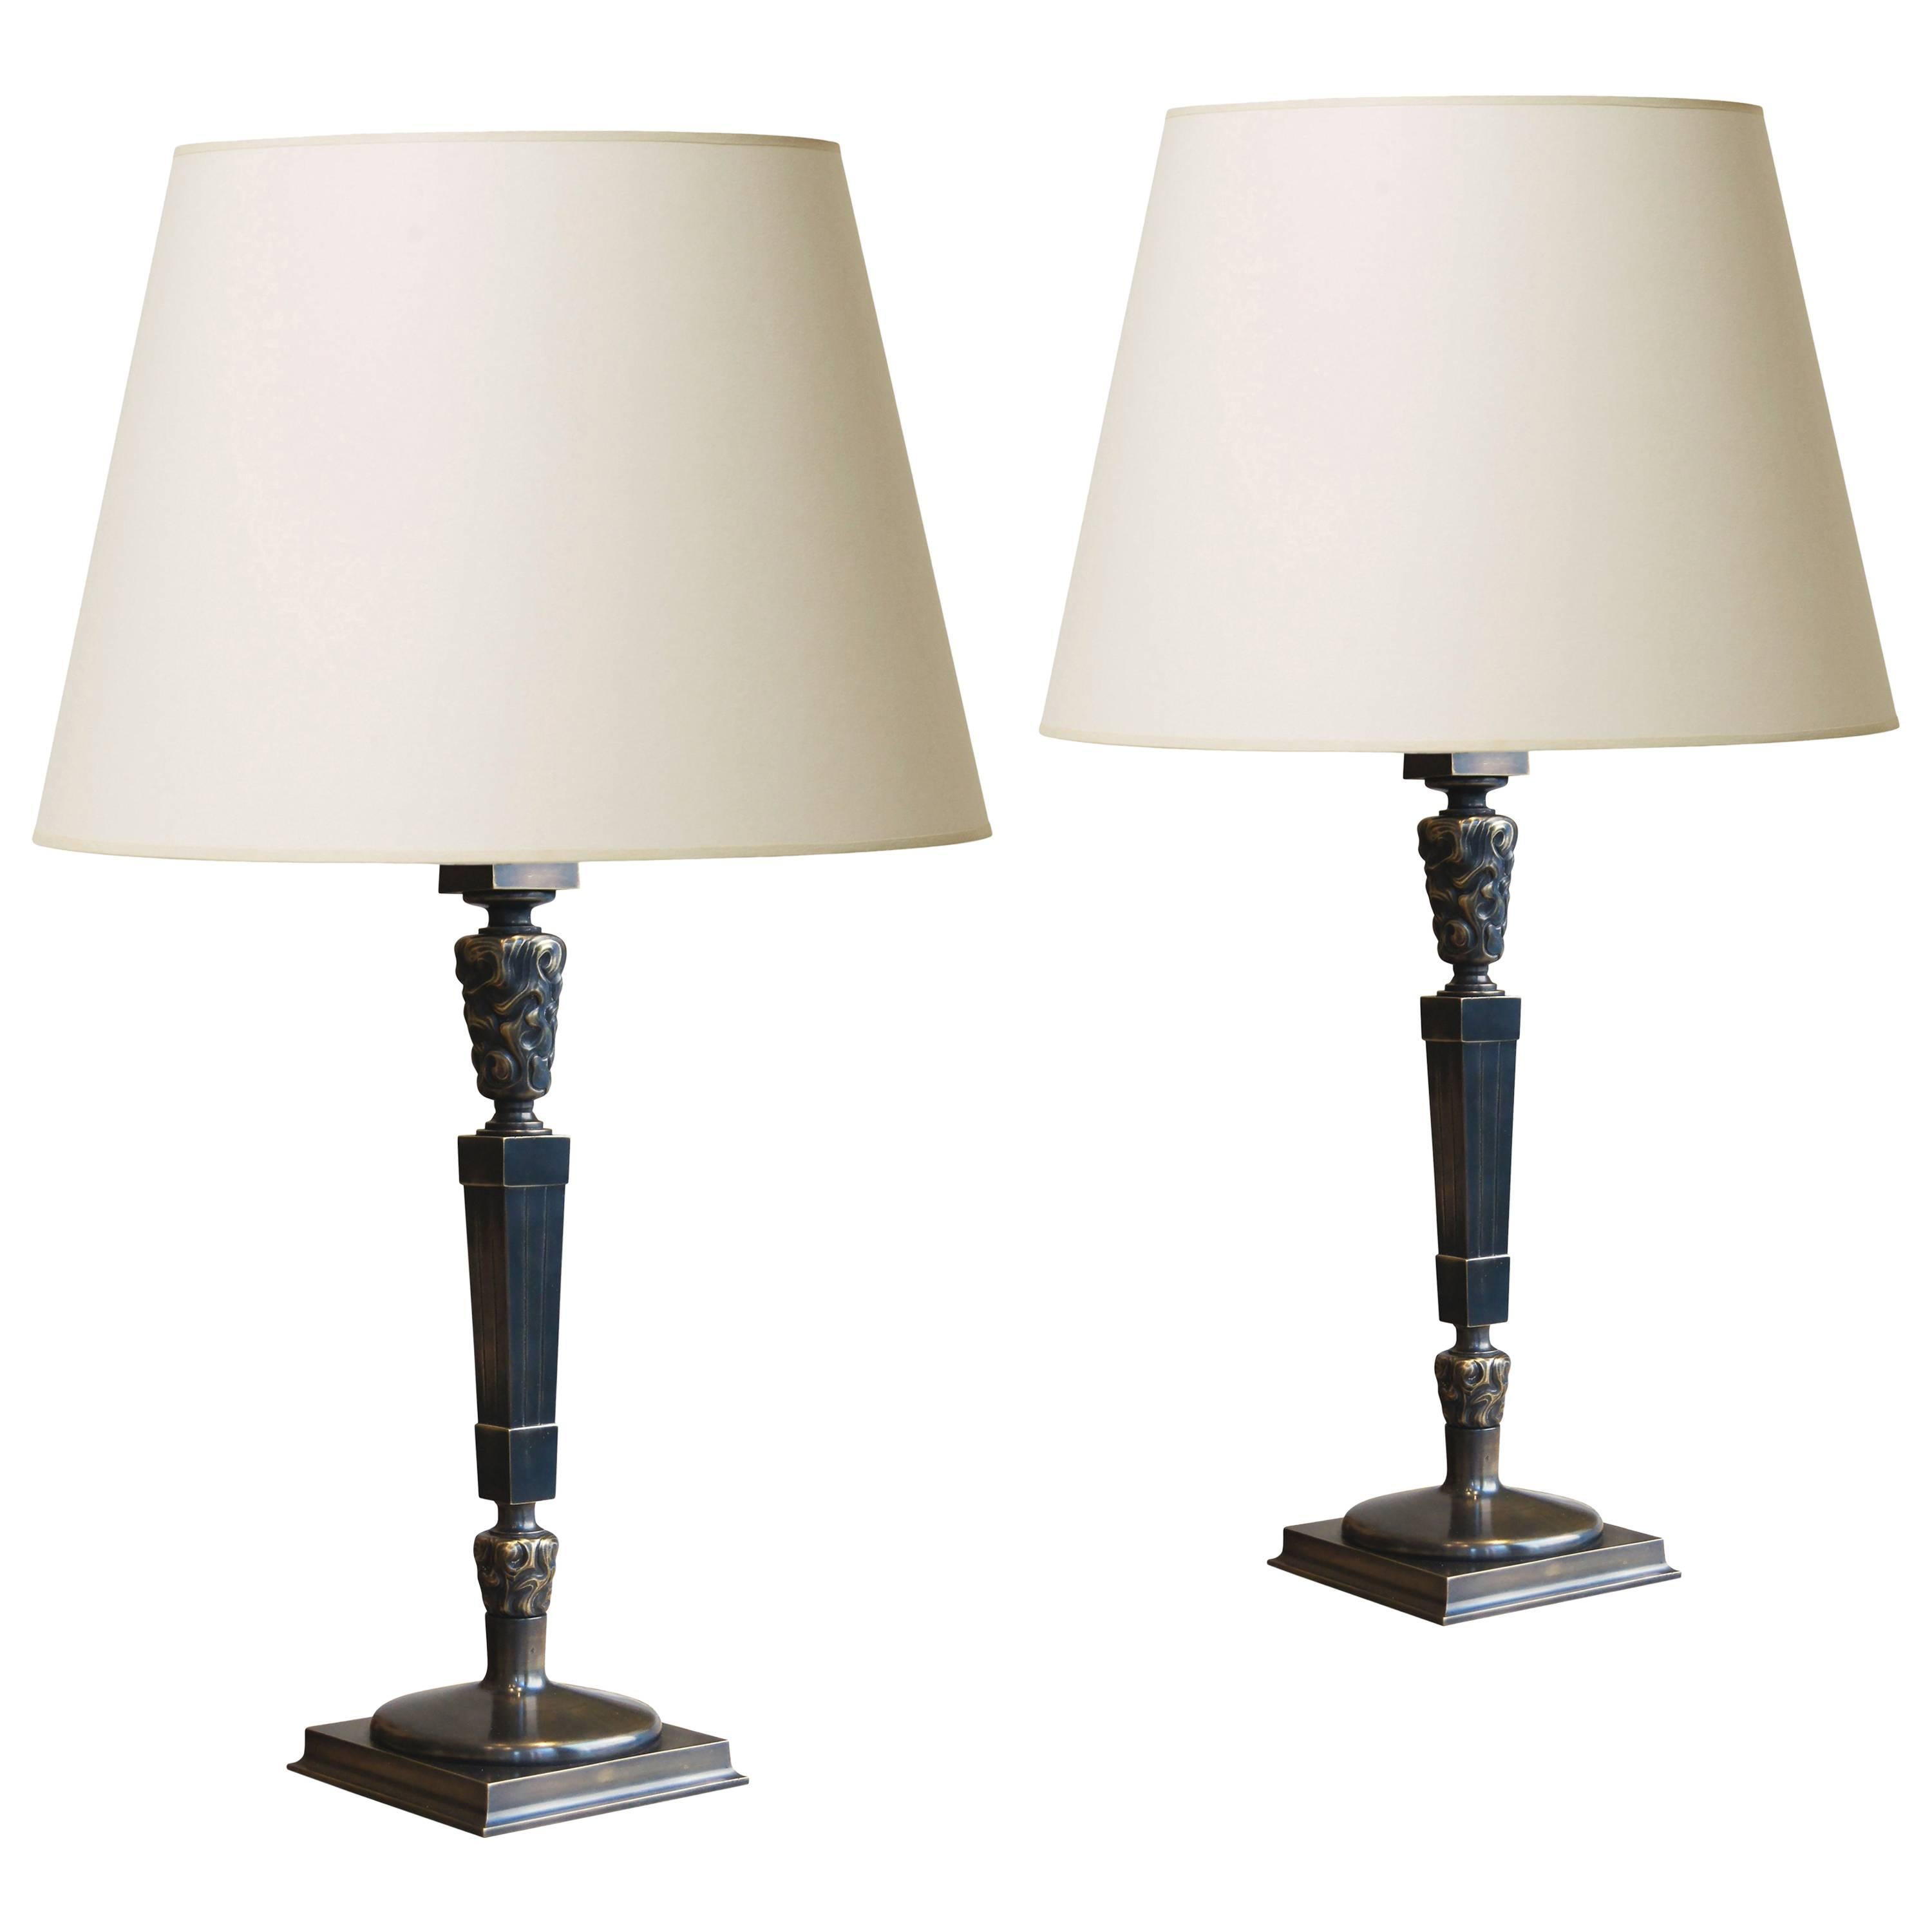 Pair of Promethian Torch Theme Table Lamps in Bronze by Thorvald Bindesbøll For Sale